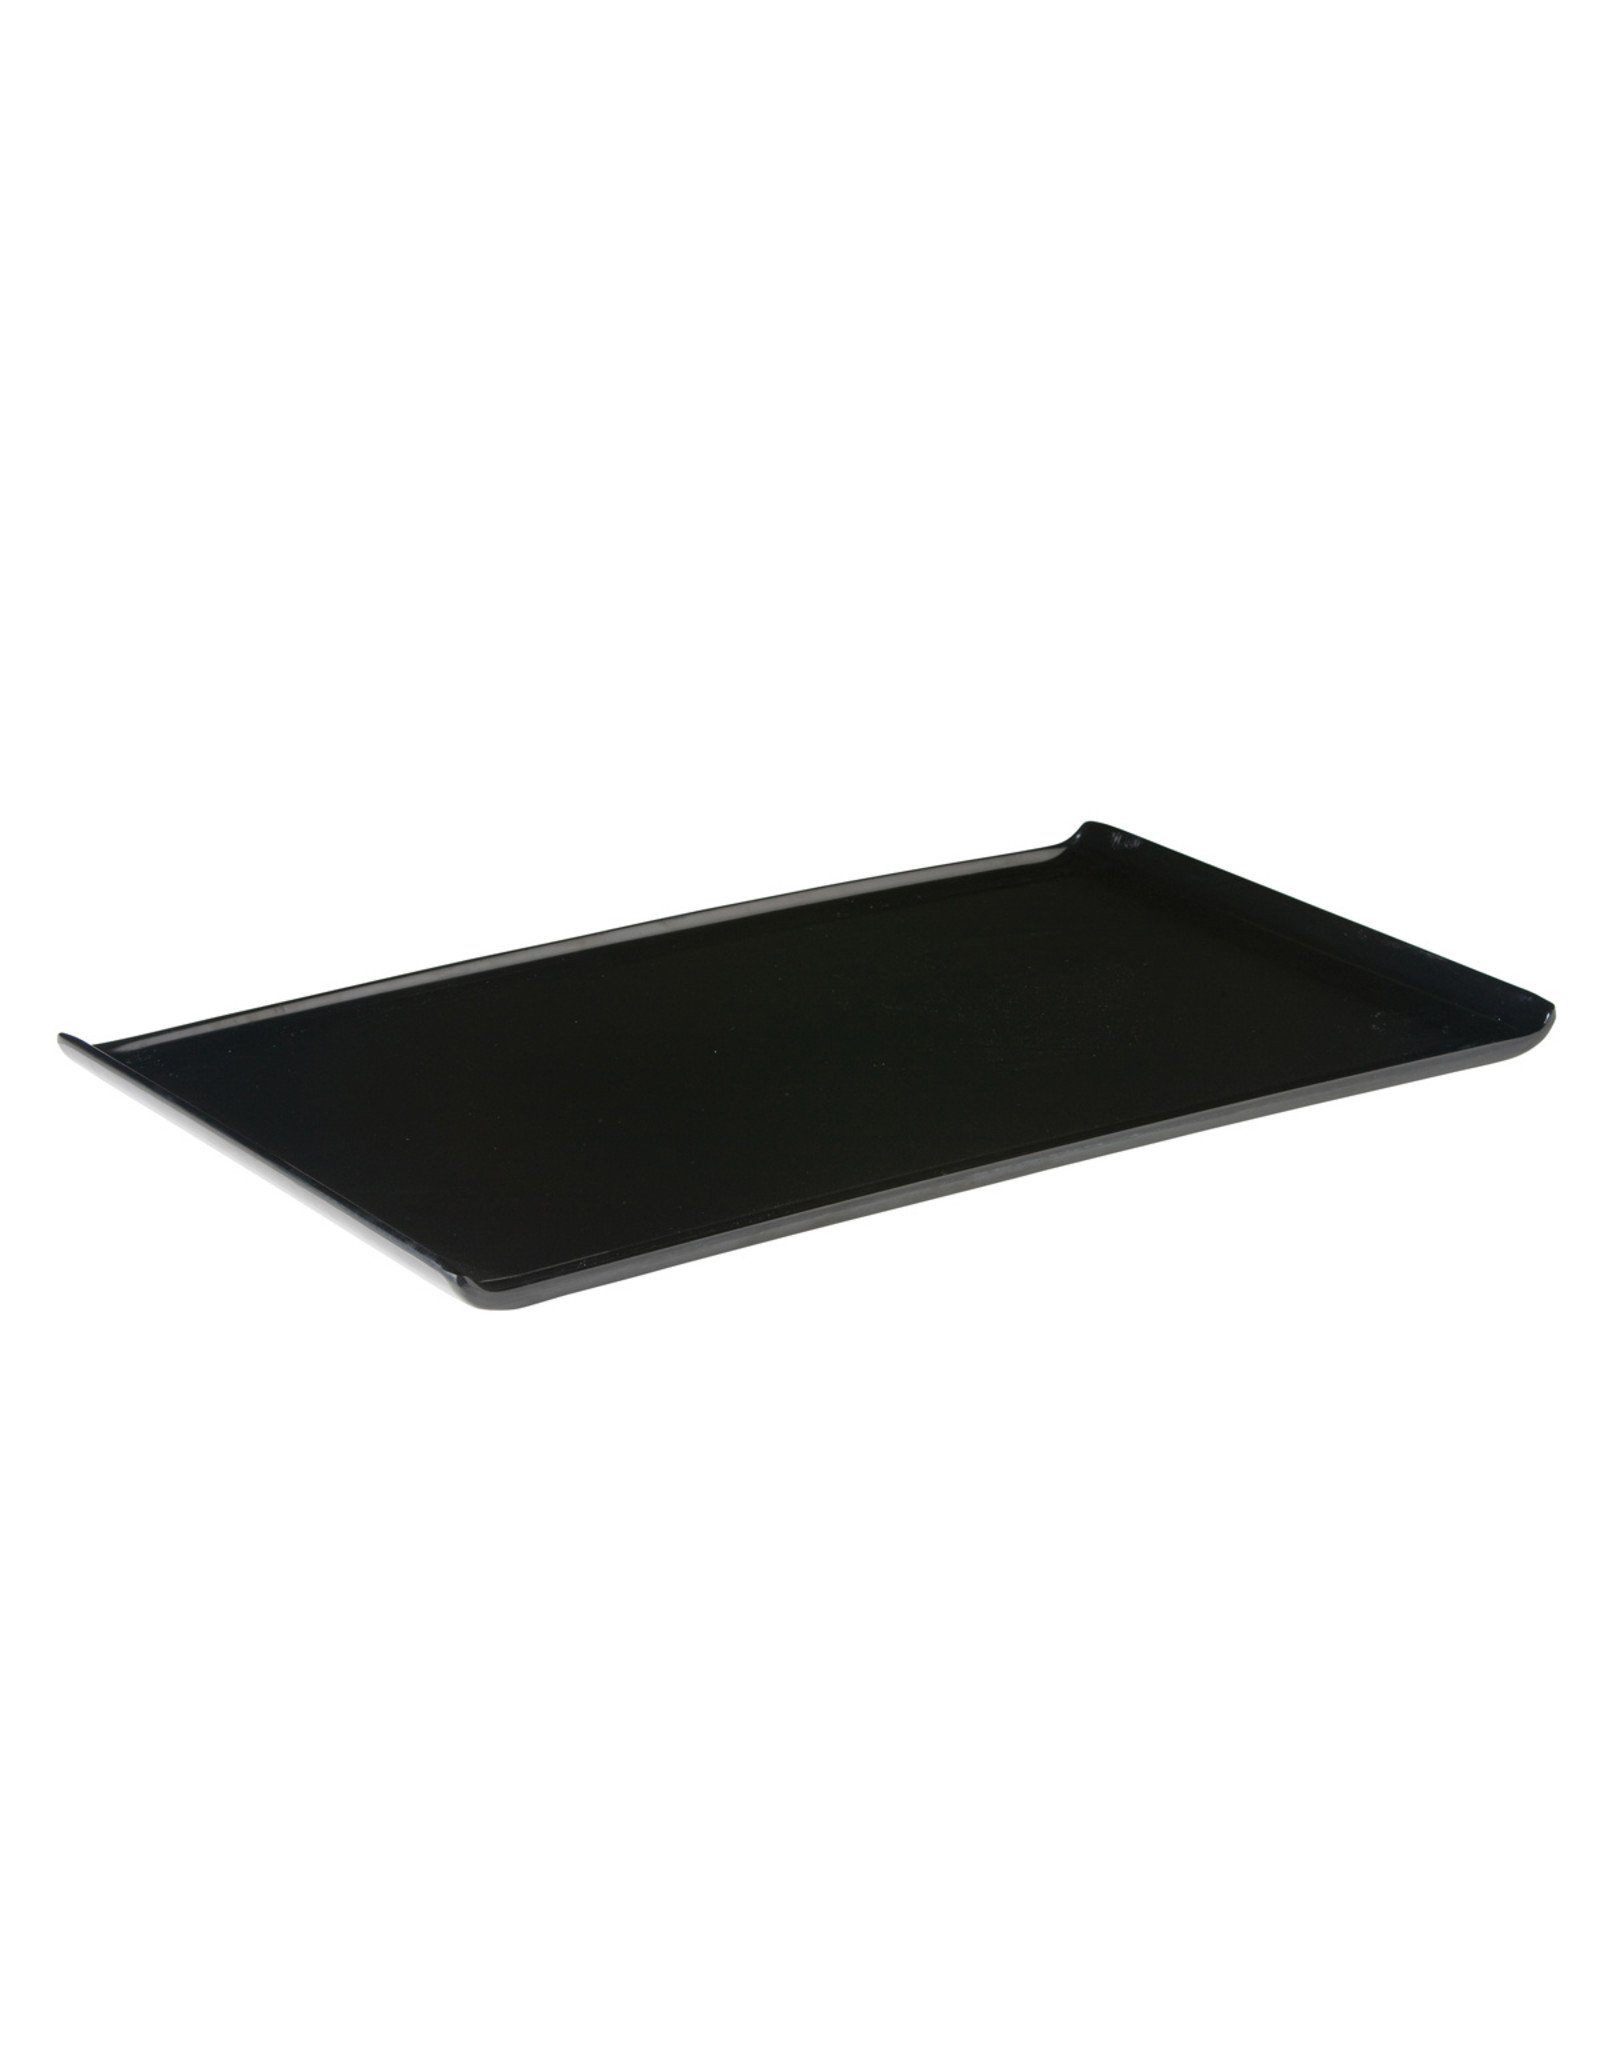 Stylepoint GN 1/1 plateau without rim black 53 x 32,2 x 2,7cm